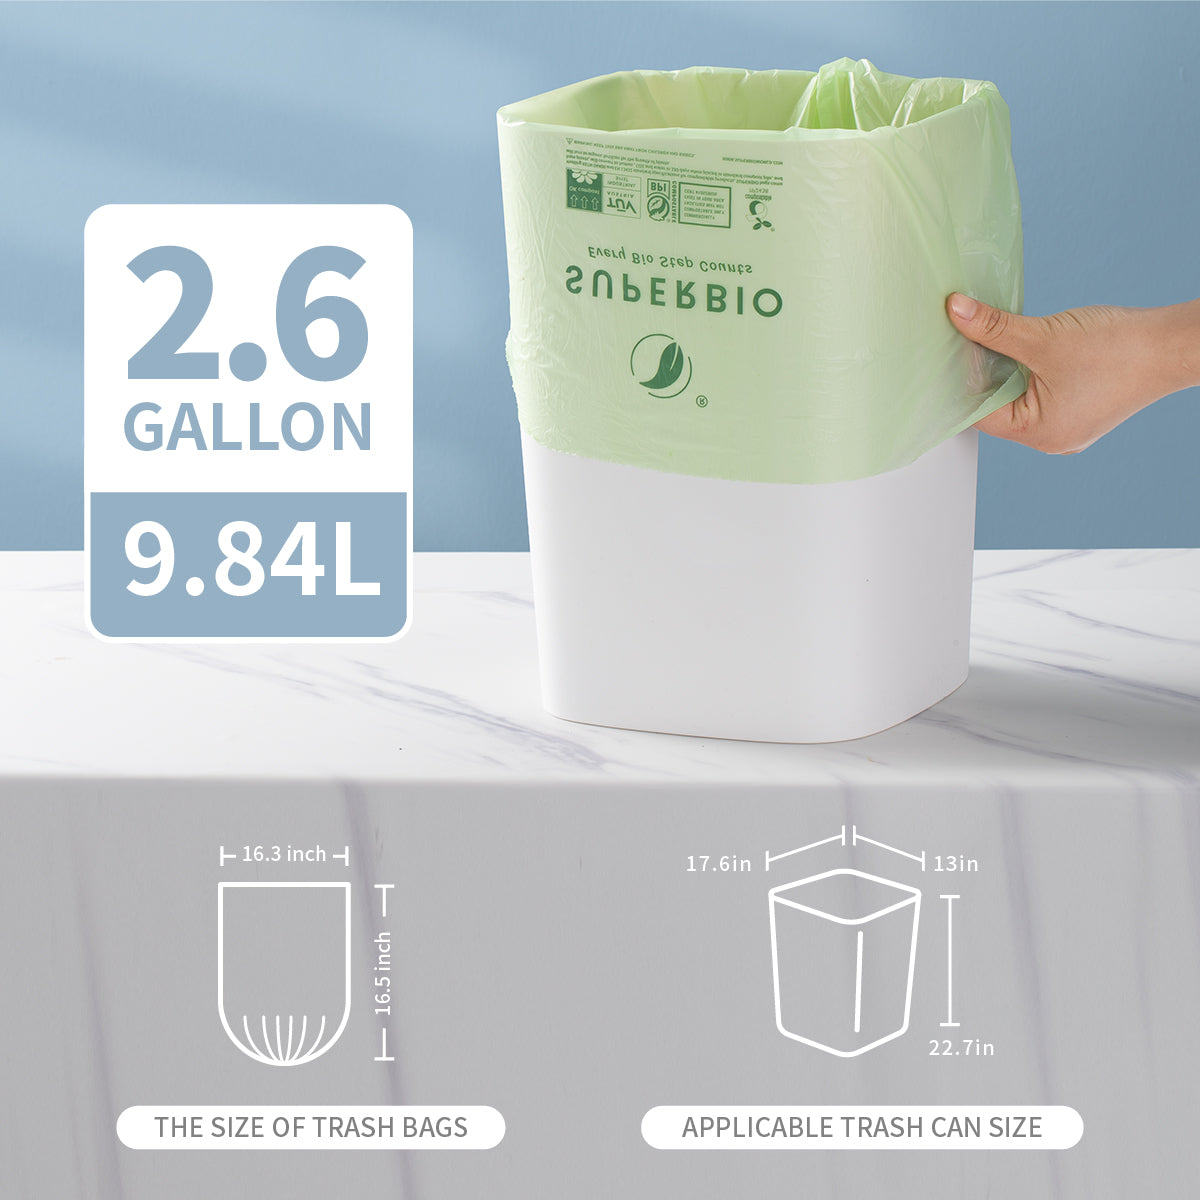 2.6 Gallon 165 Counts Strong Trash Bags Garbage Bags by Teivio